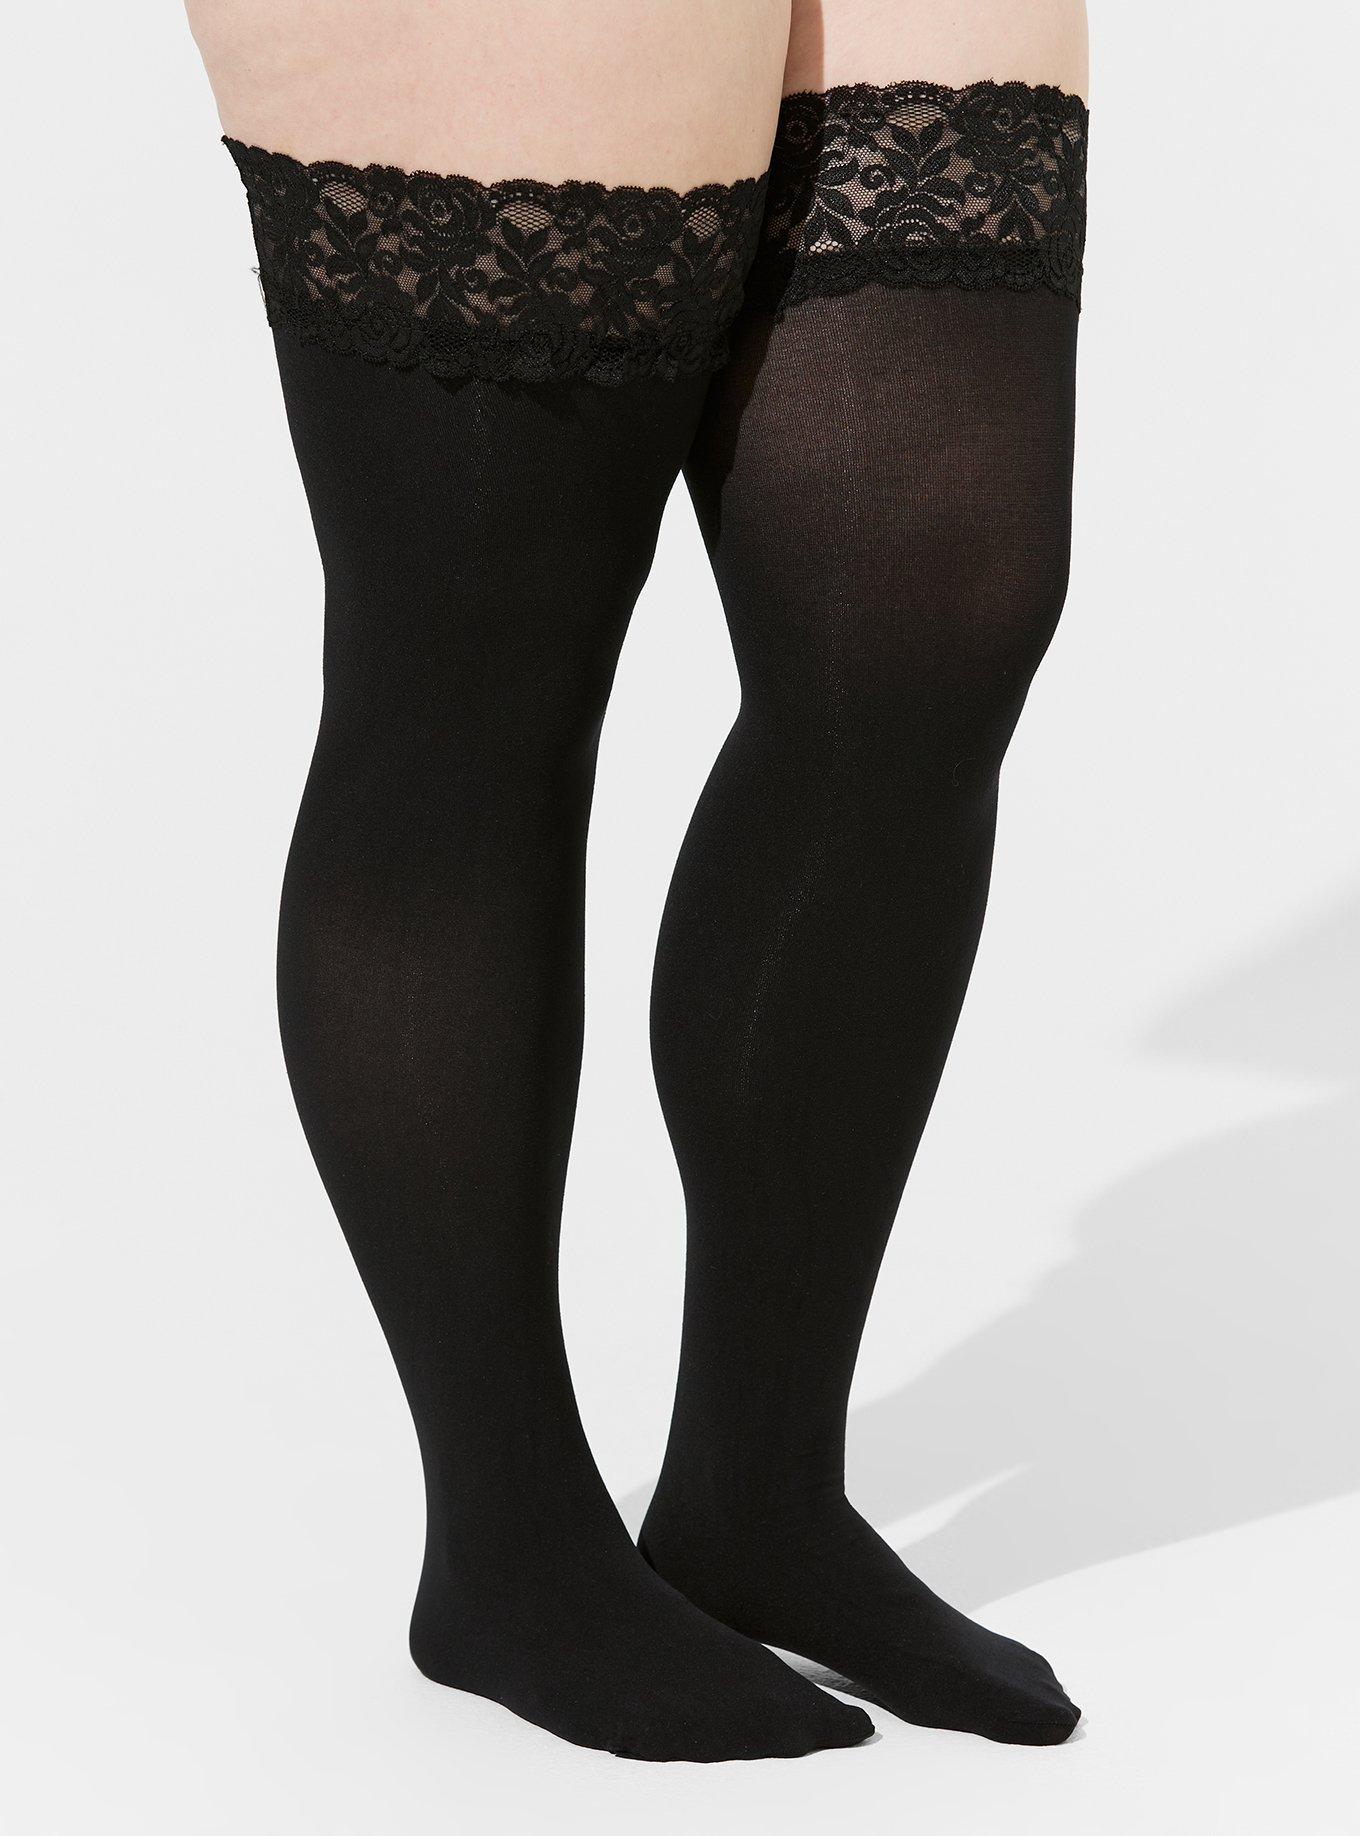 Plus Size - Black Lace Thigh High Tights - Torrid